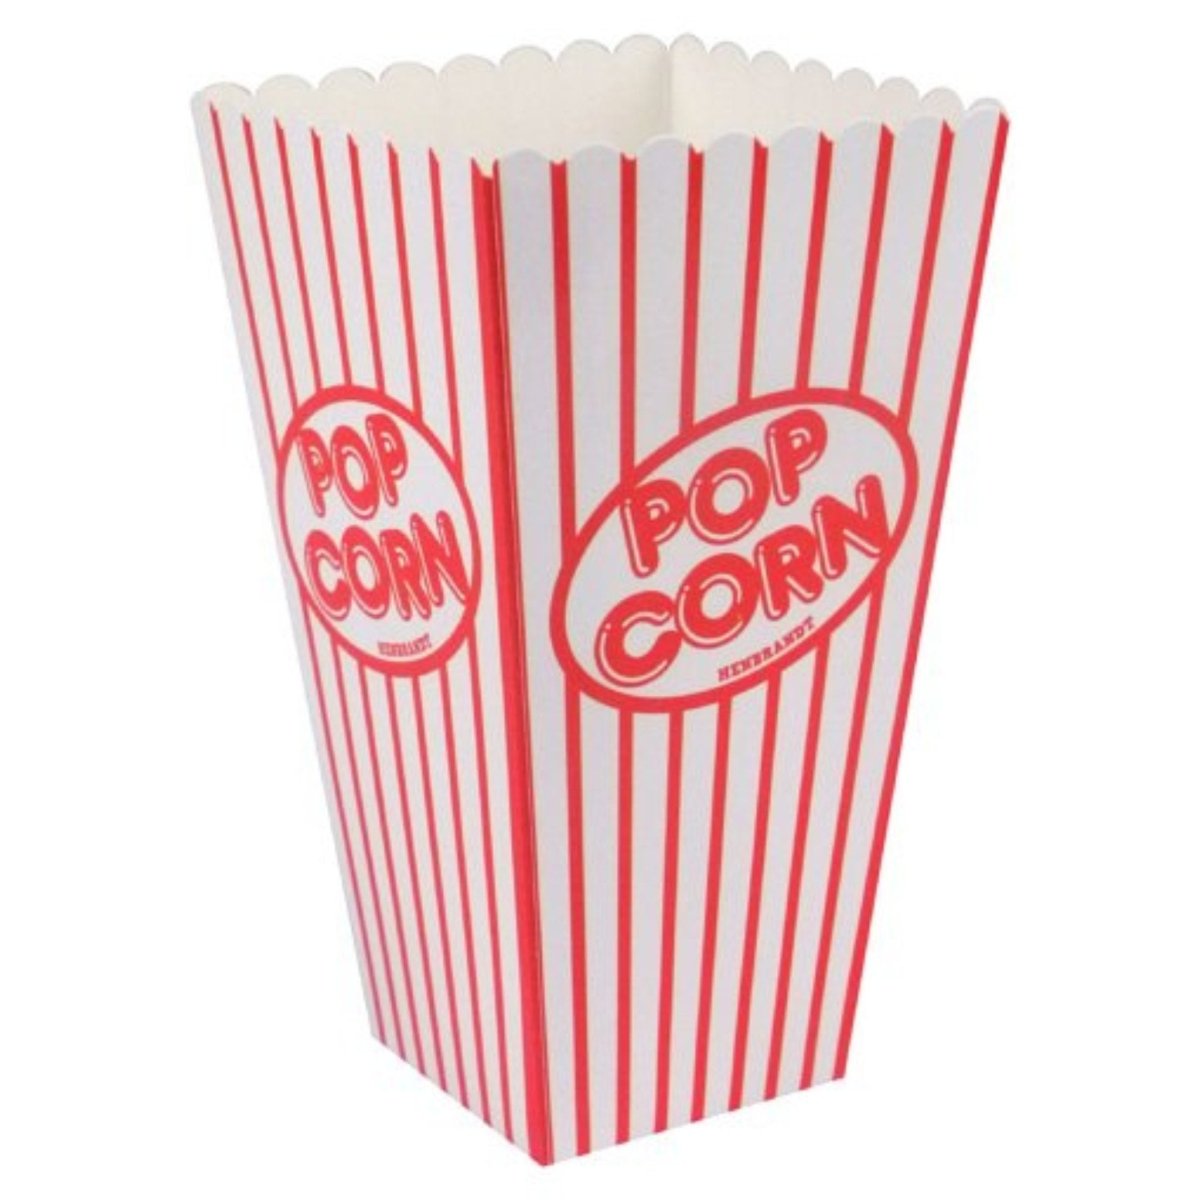 Pop Corn Boxes (10 pack) - Kids Party Craft